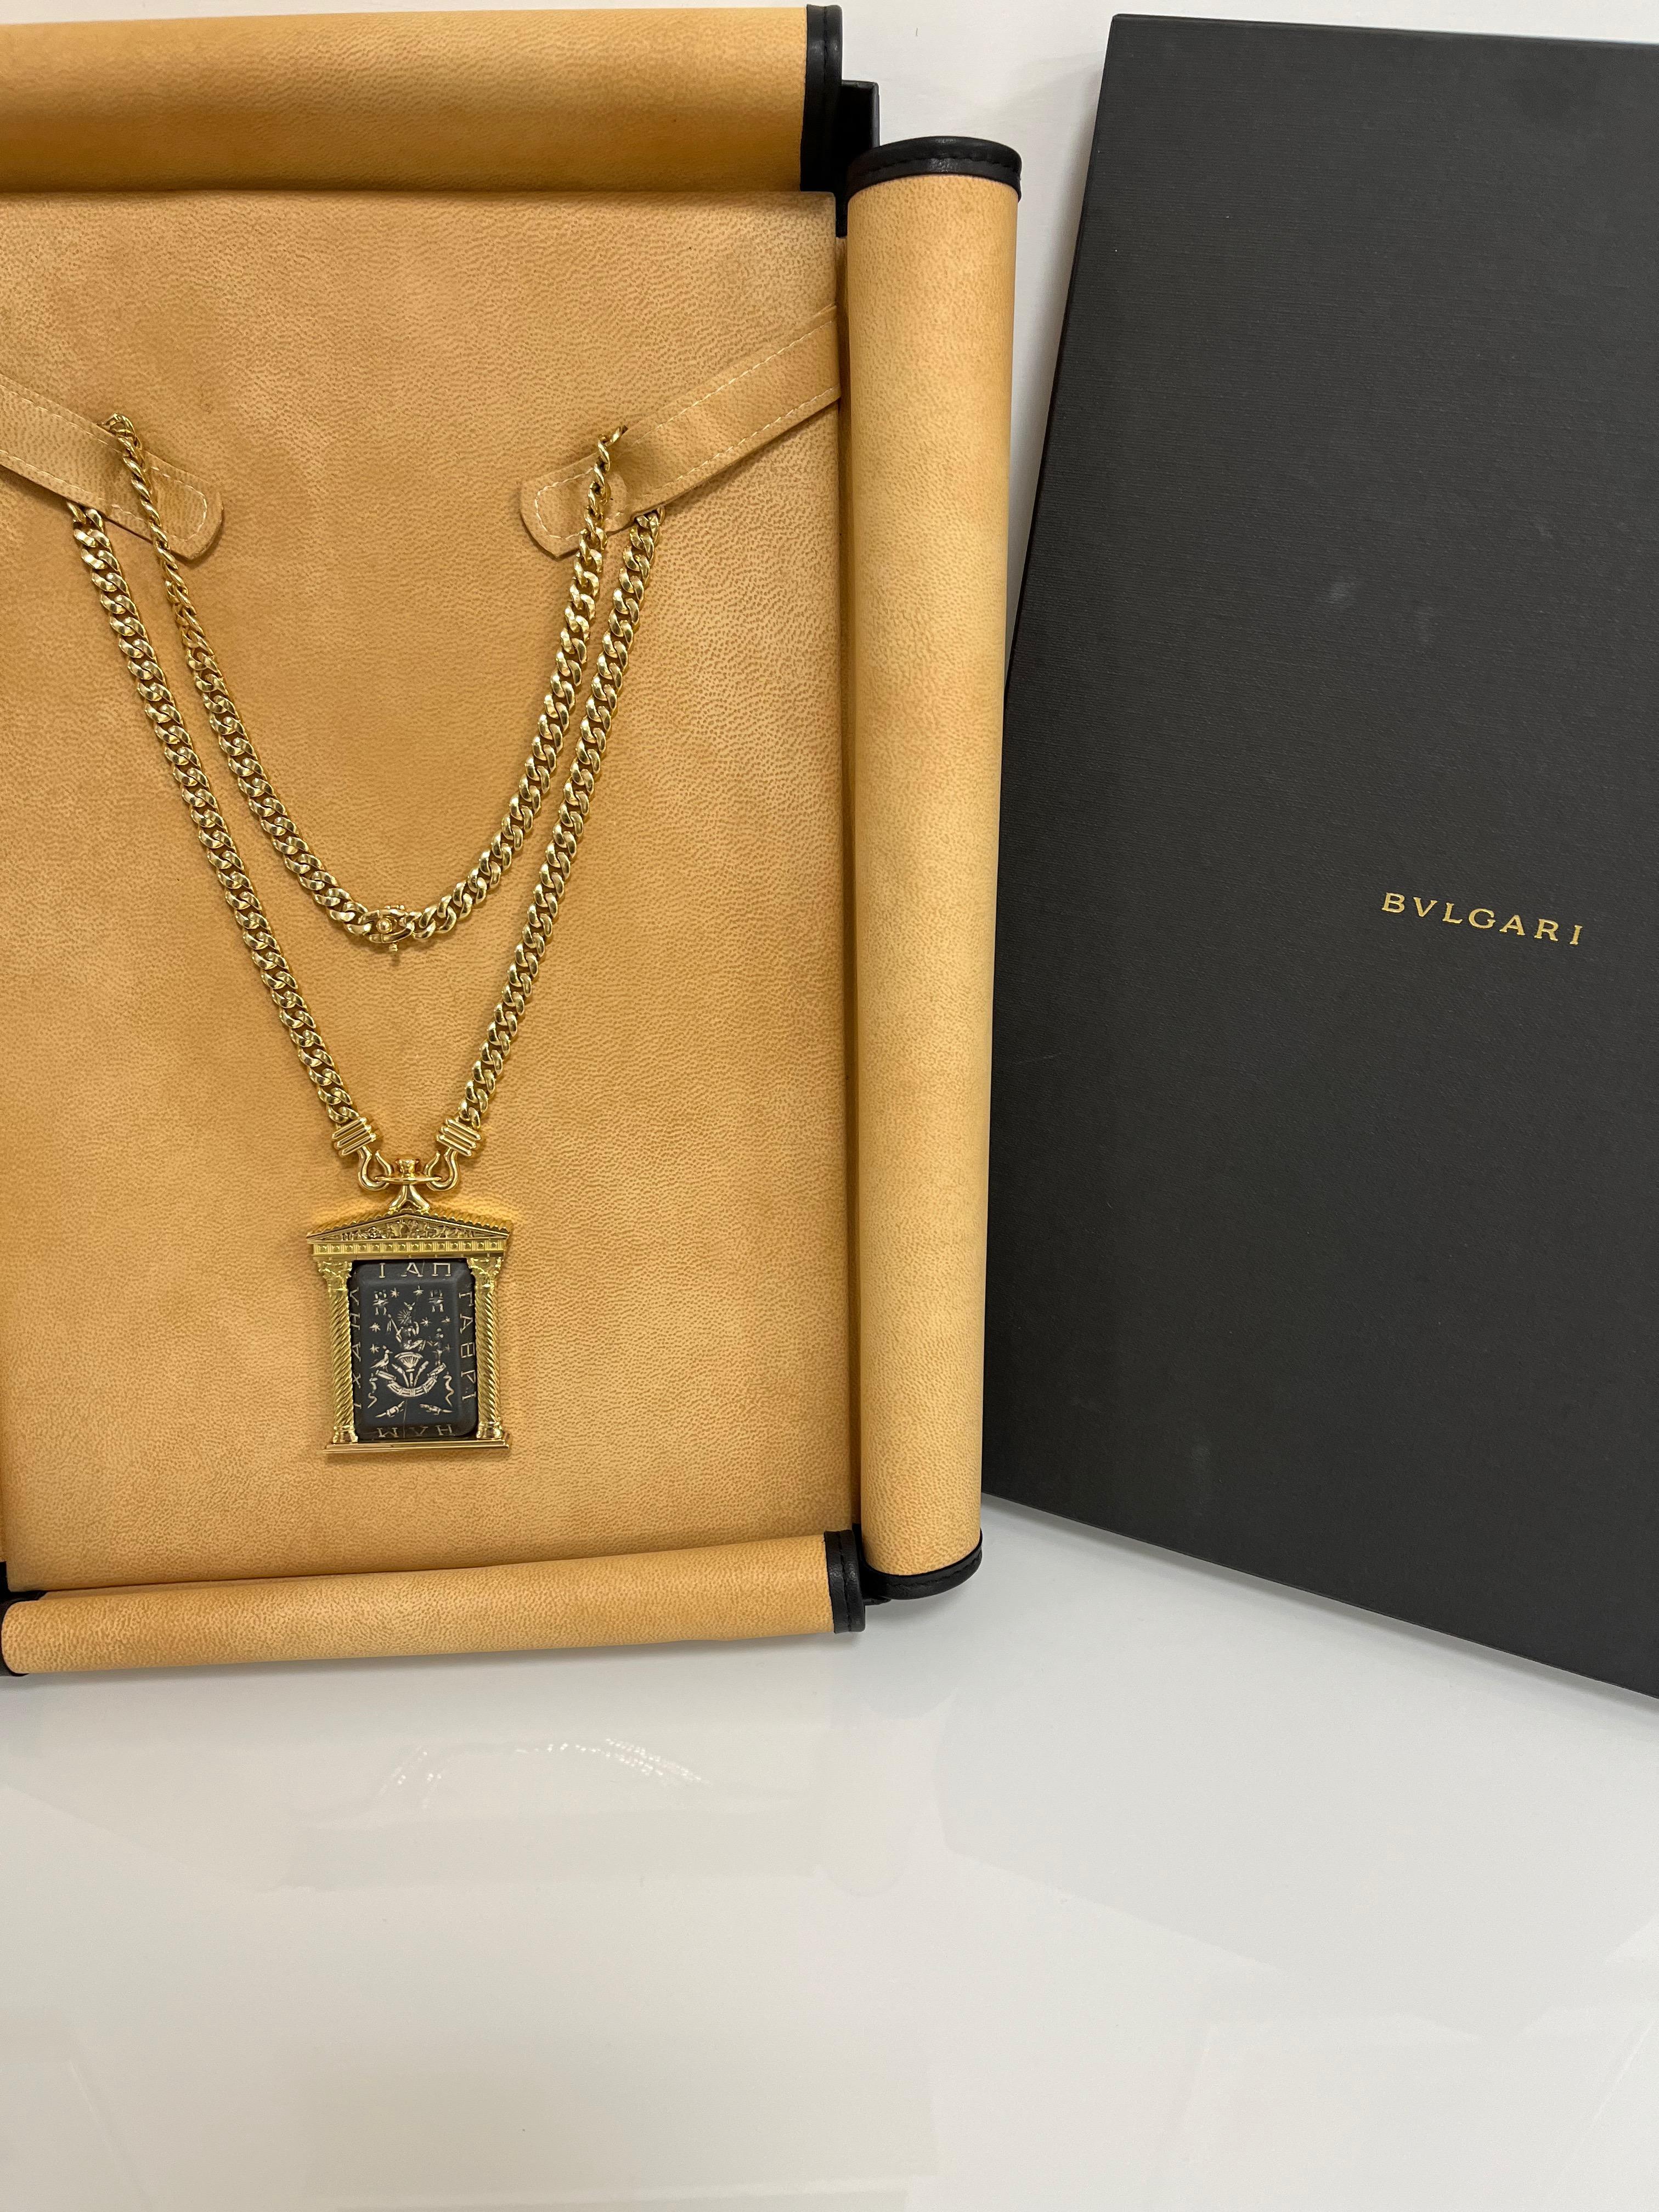 One of a Kind 1970 Bulgari 18 Karat Yellow Gold Necklace with Engraved Pendant 4